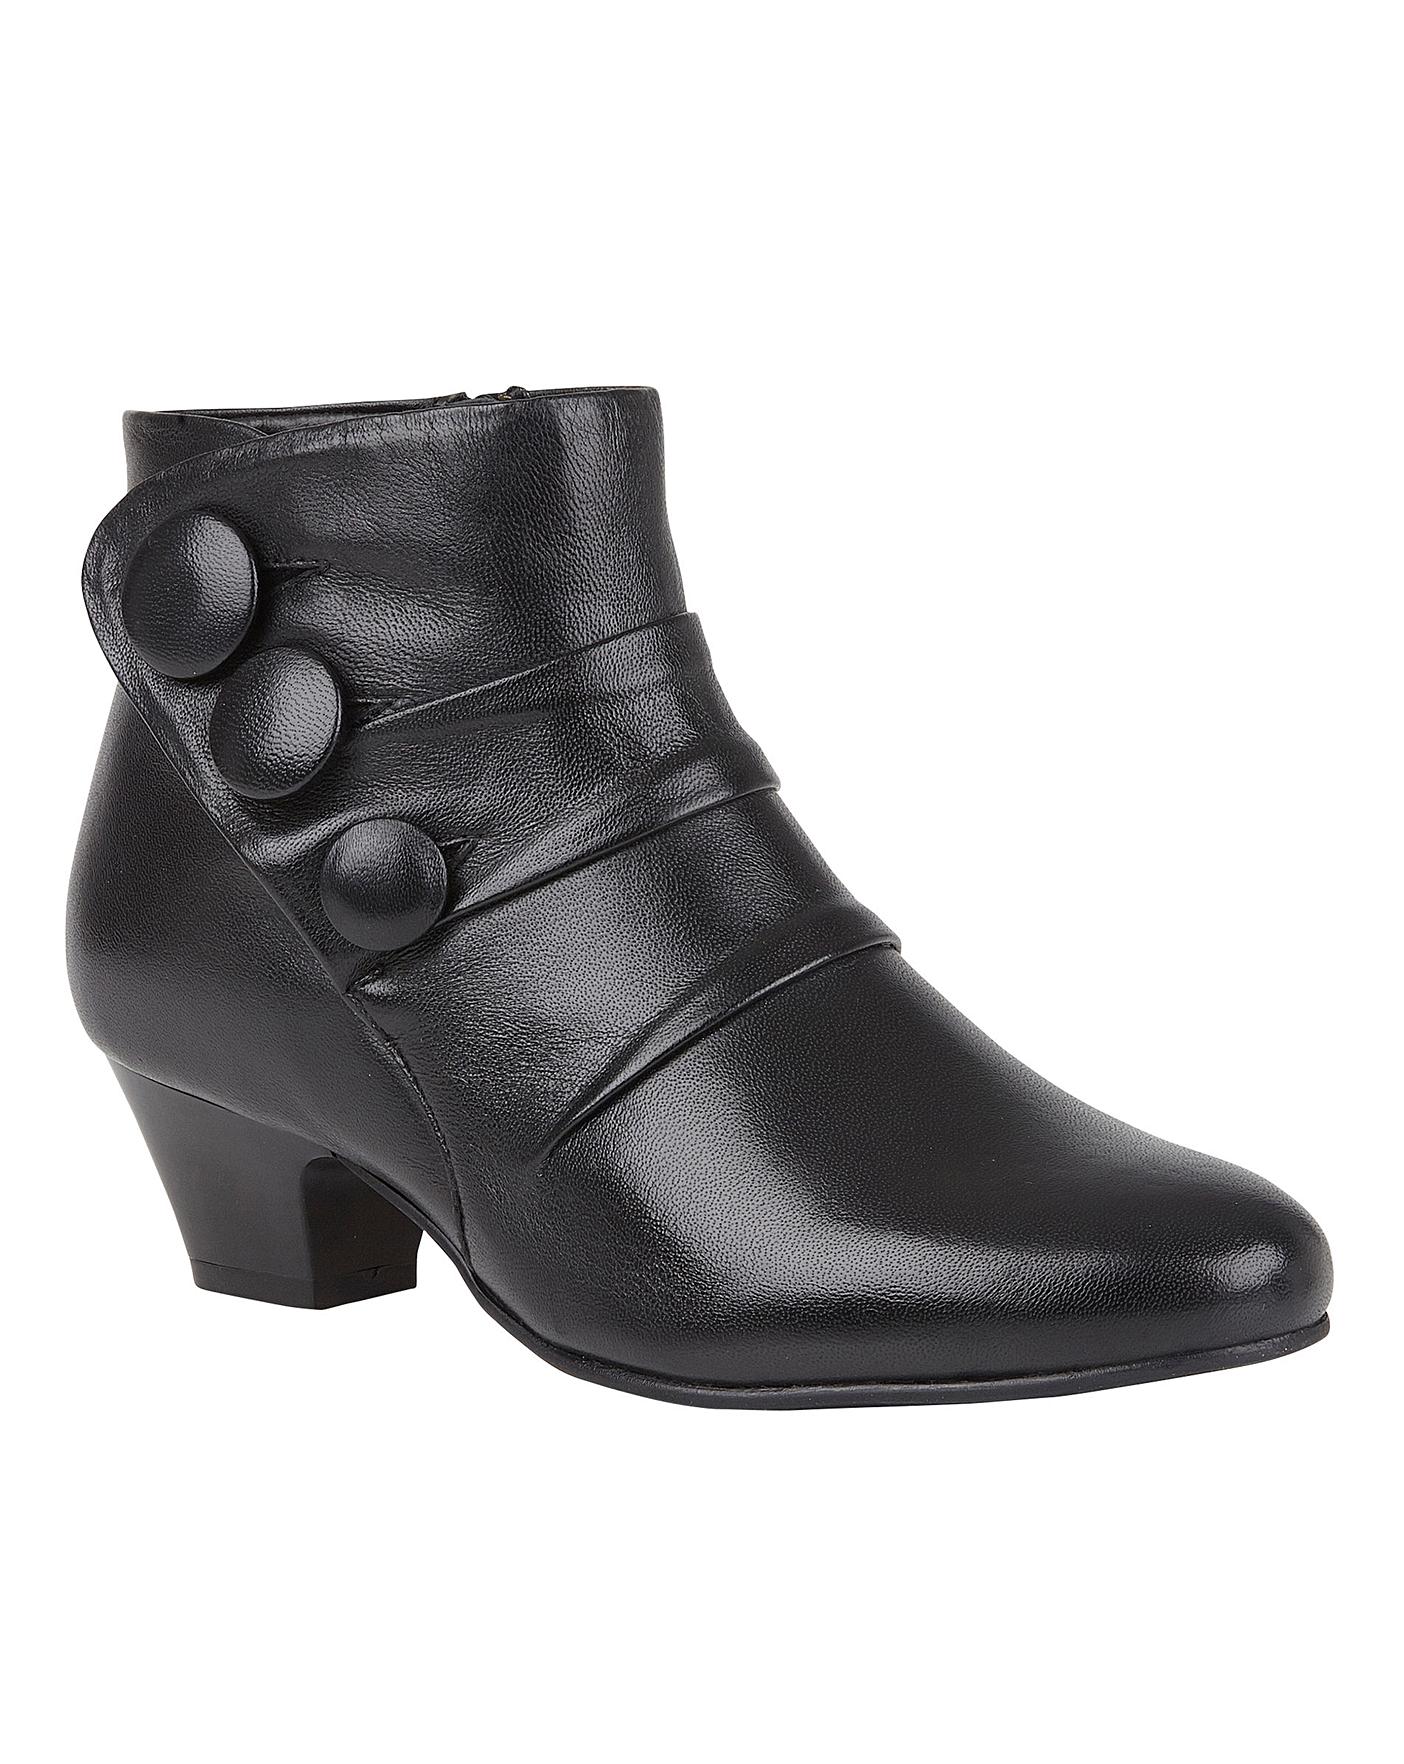 Lotus Prancer Leather Ankle Boots E Fit 